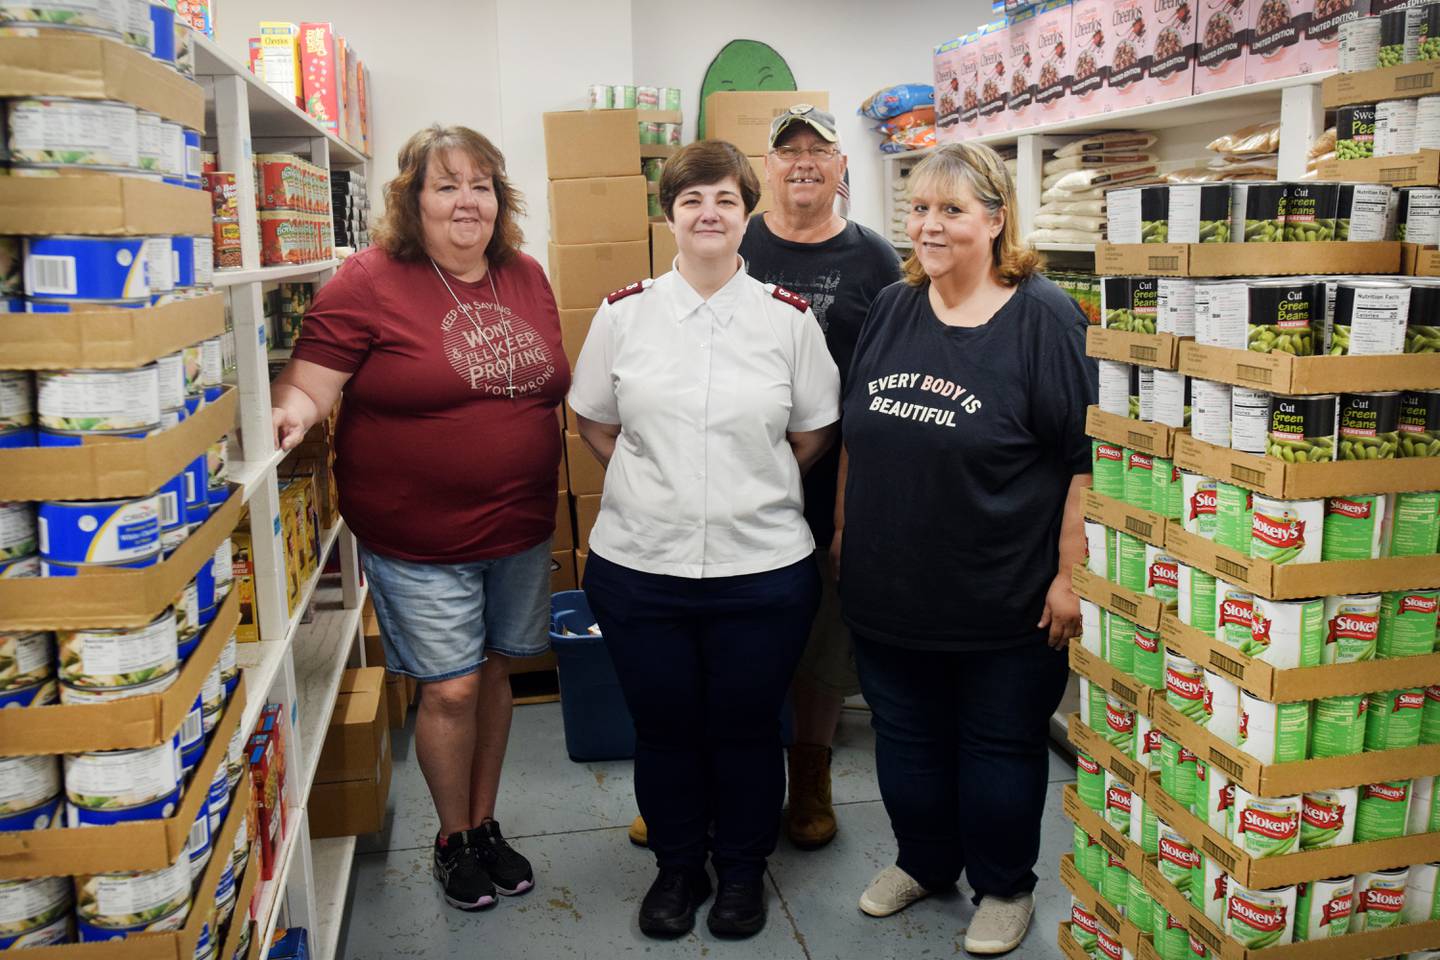 From left: Kayla Johnson, Captain Janelle Cleaveland, Ed Poe and Kelly Jo Zach pose for a photo inside the food pantry of the Newton Salvation Army. Cleaveland, who is leaving her post to lead a Salvation Army in Indiana, said she will miss her staff.